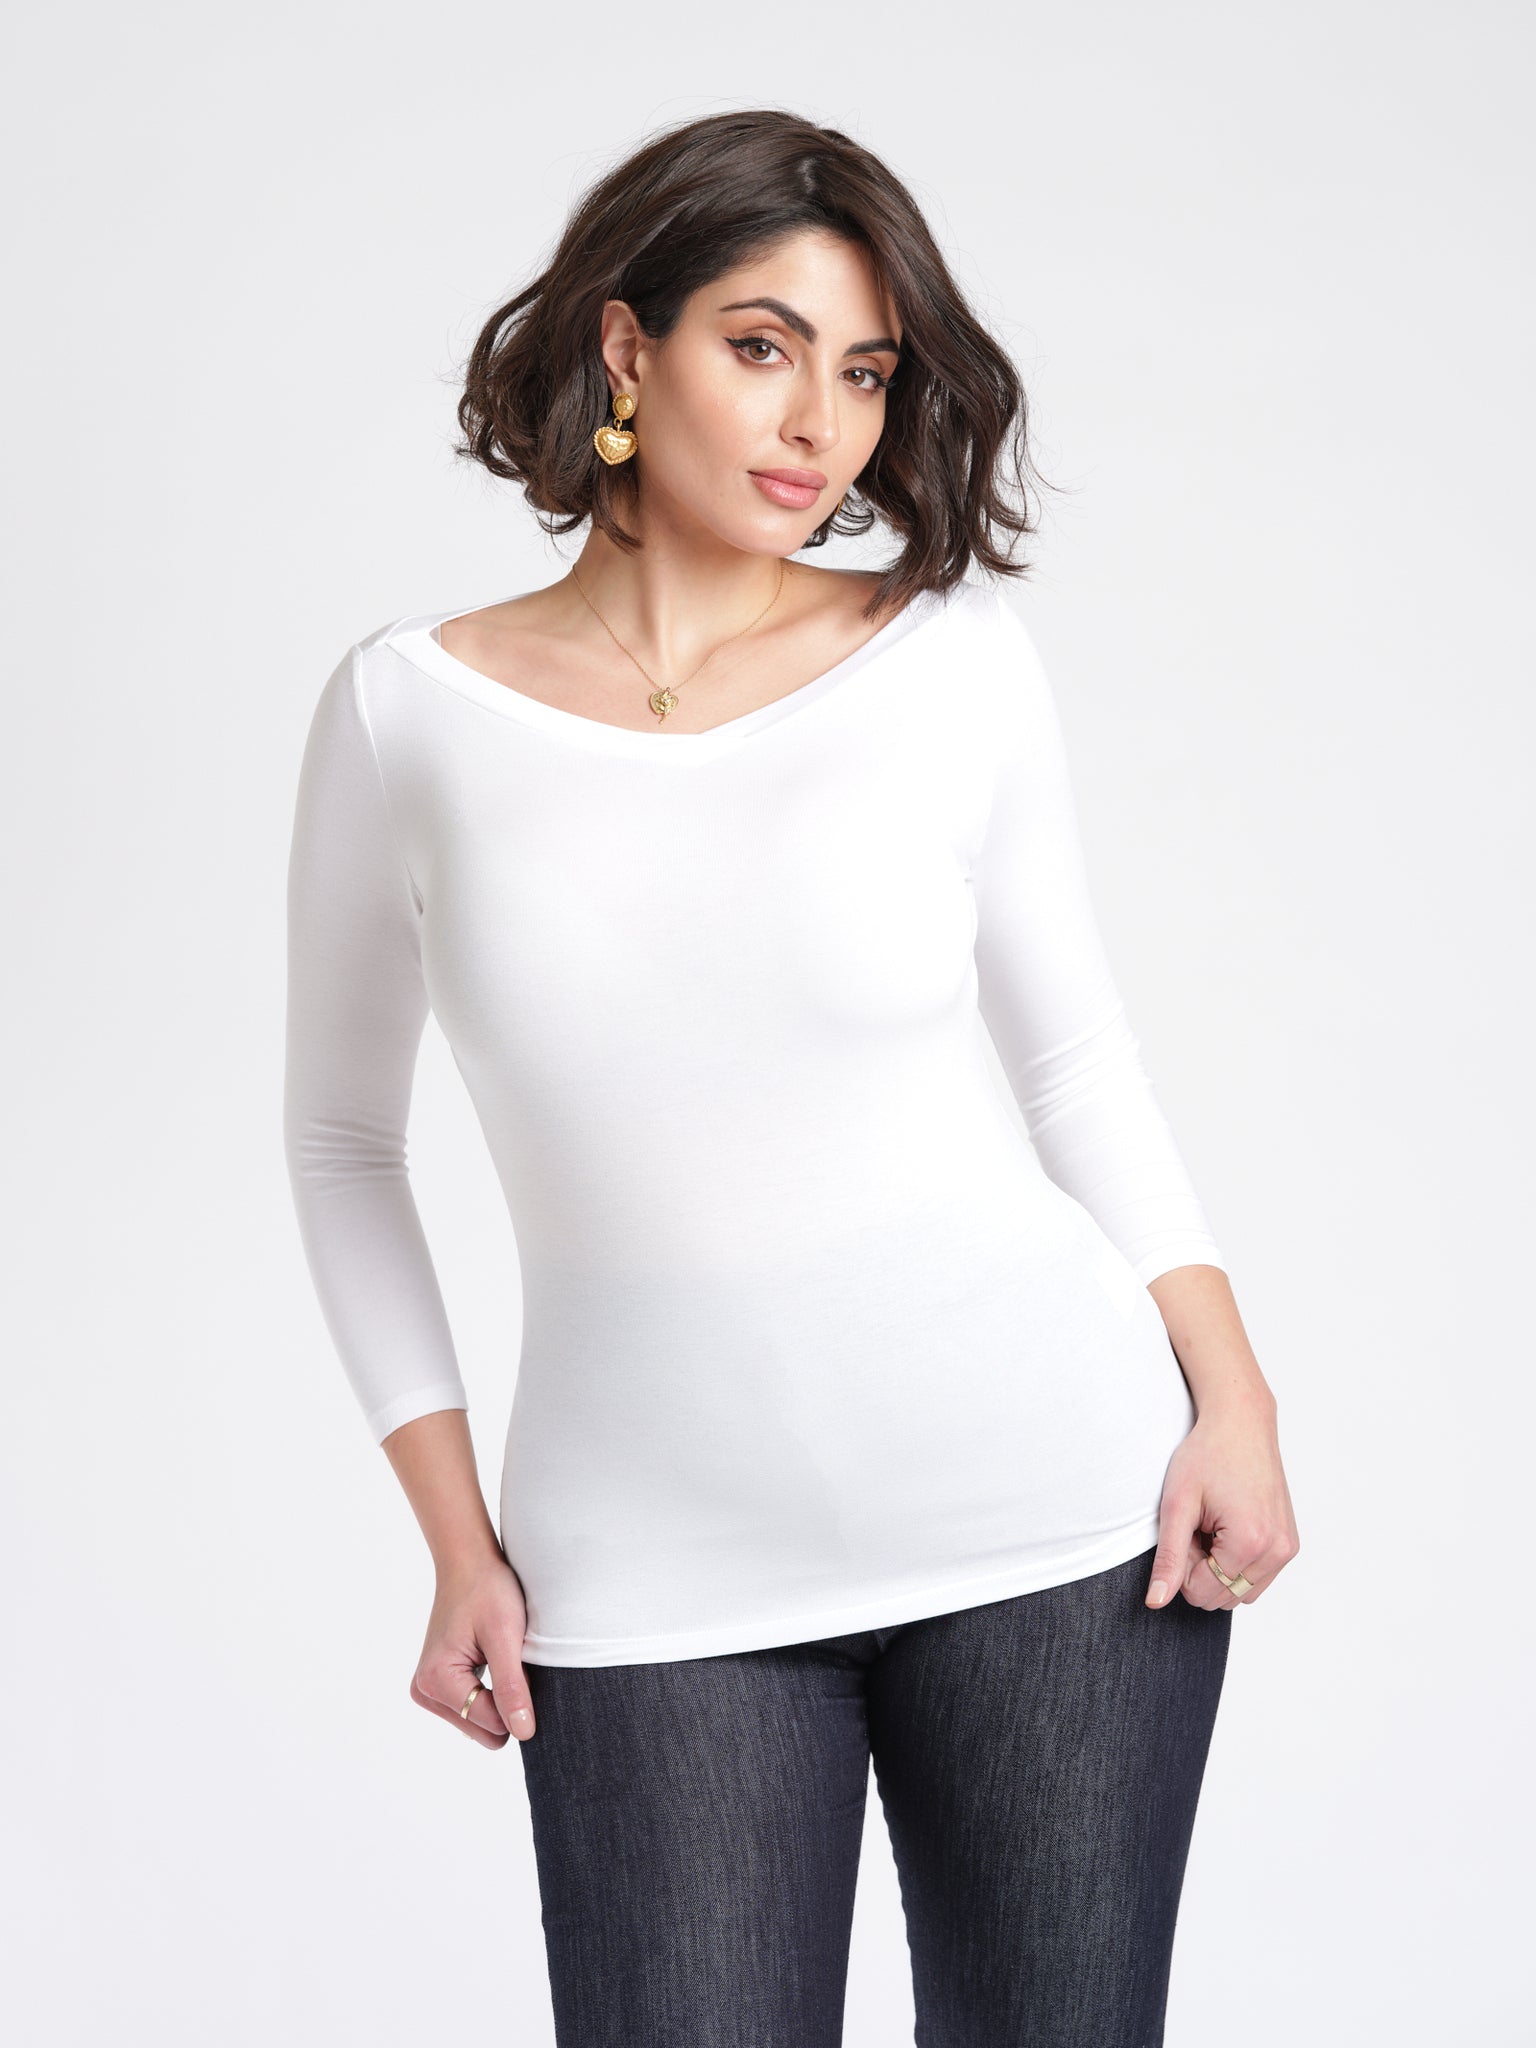 Woman wearing a white 3/4 length sleeve fuller bust bamboo pullover with stylized boatneck by Miriam Baker.